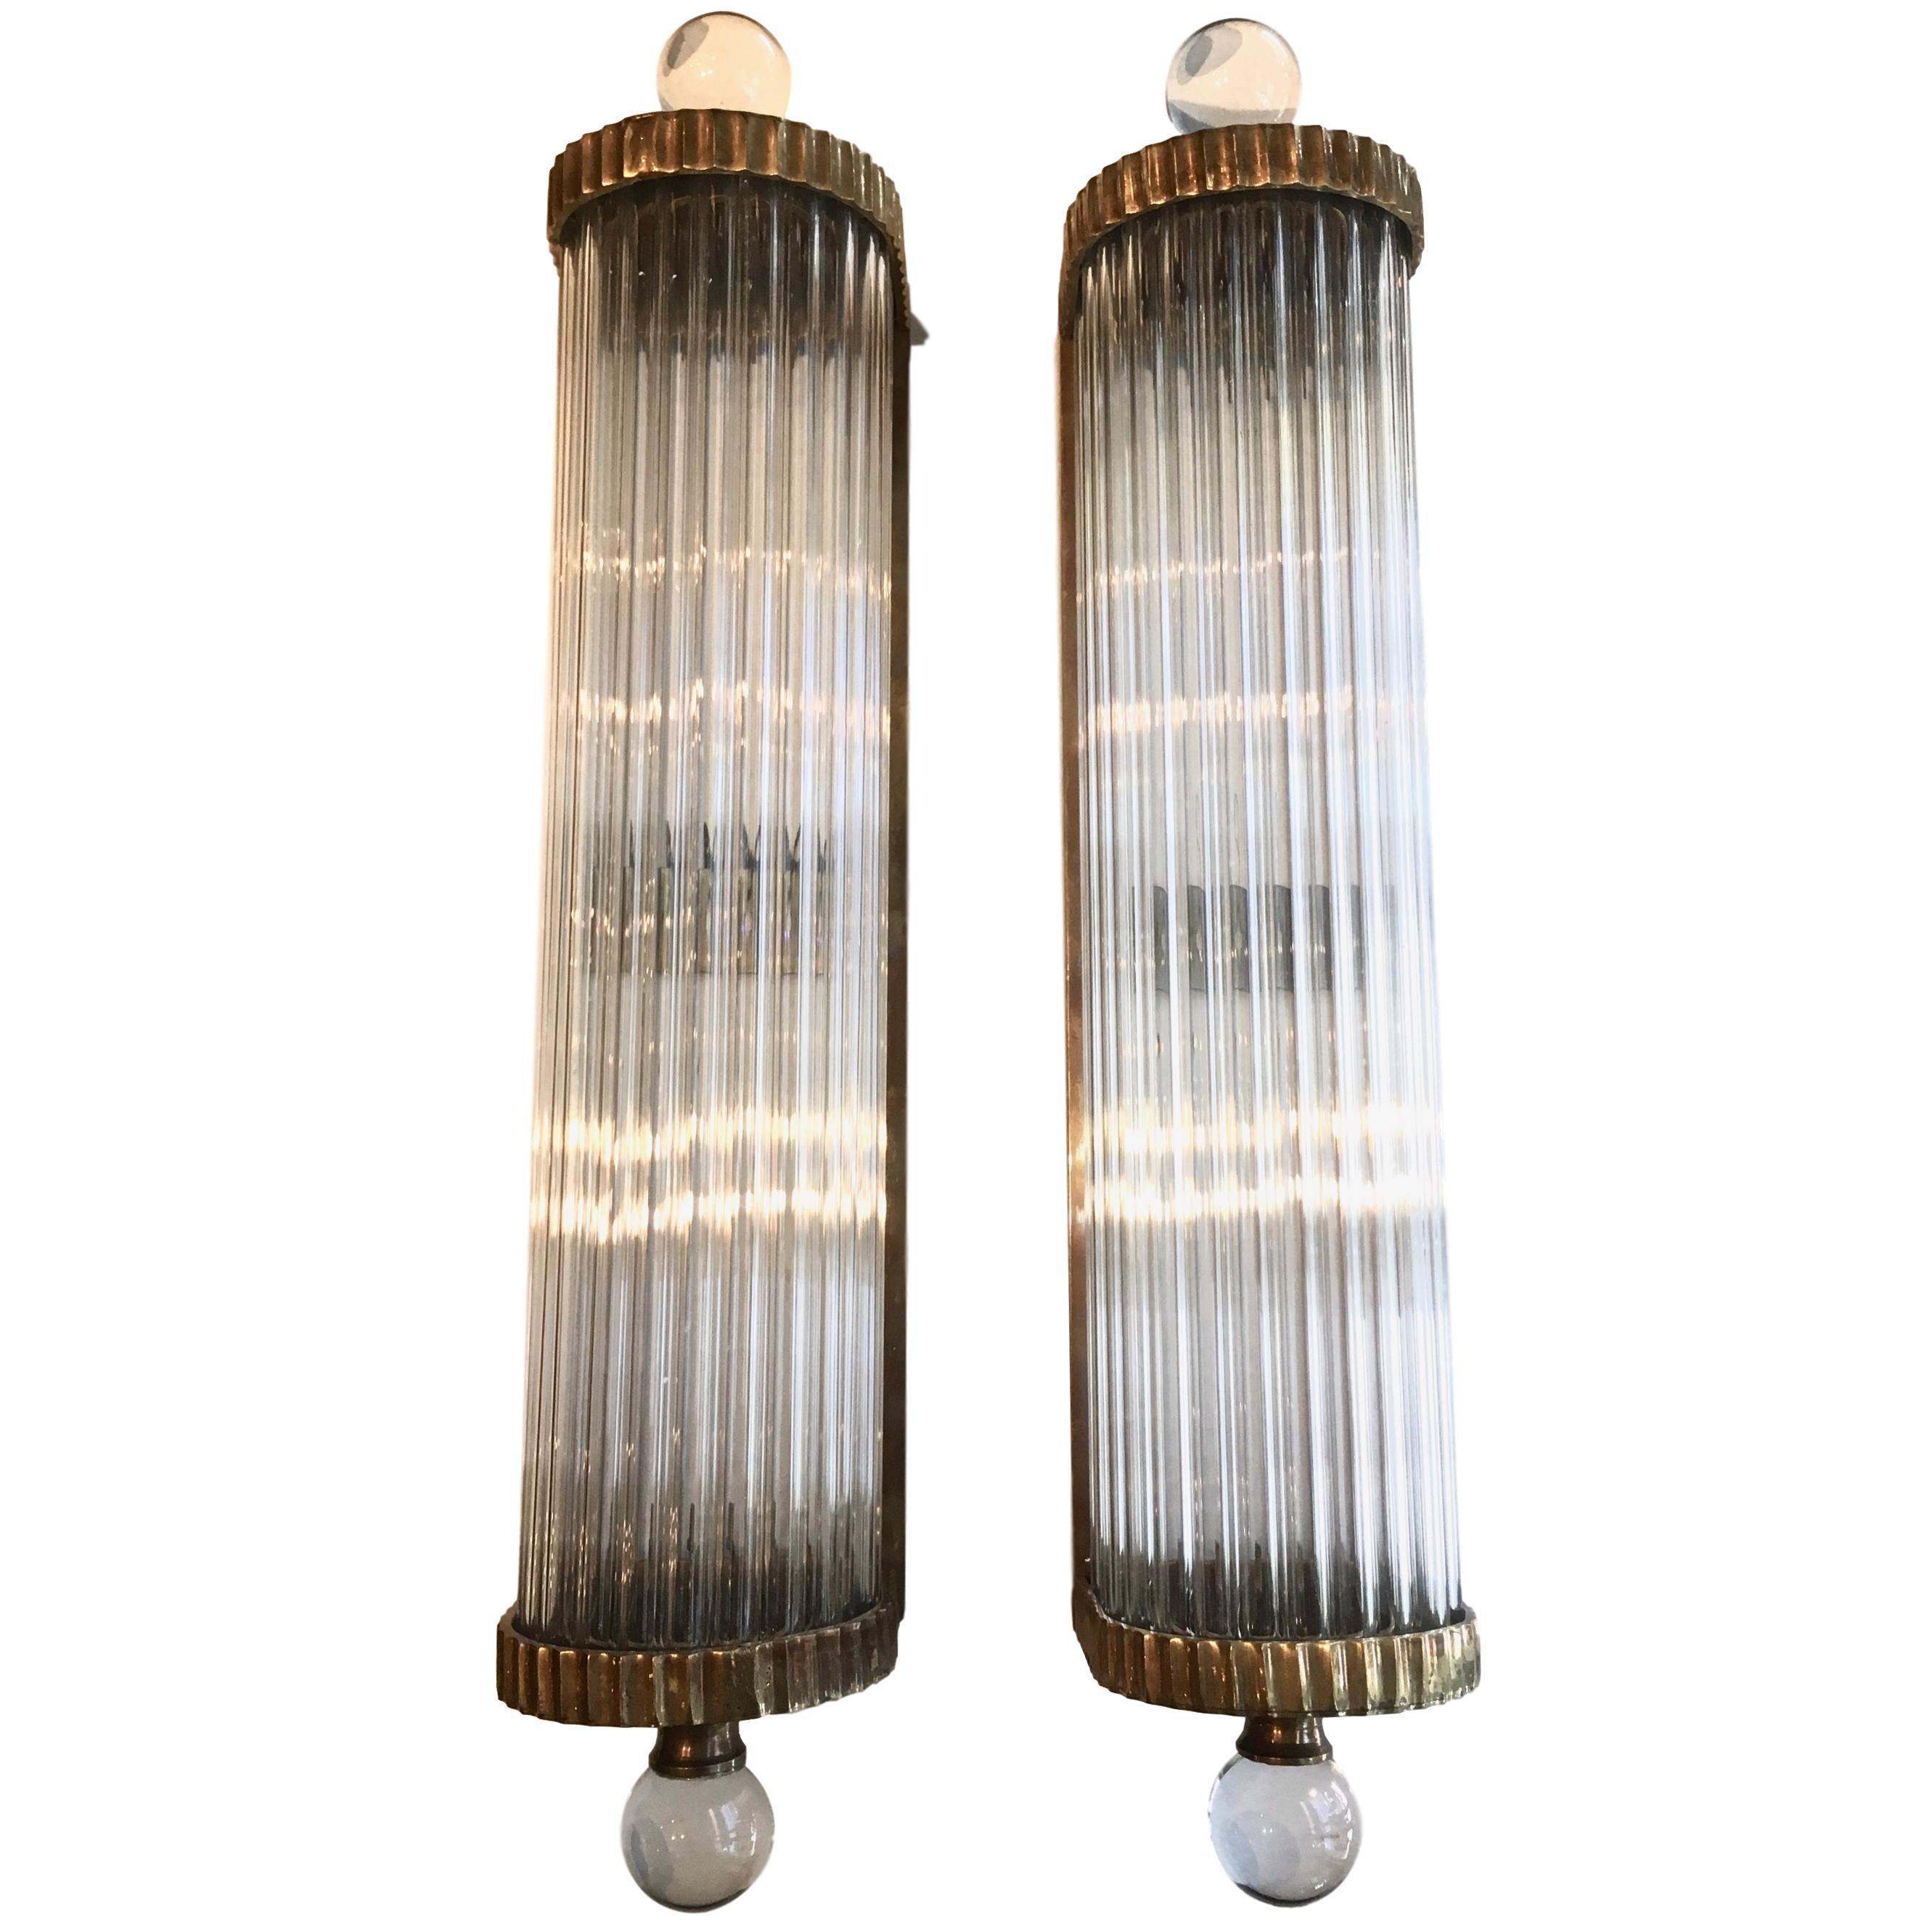 A set of eight circa 1950's Italian Art Deco patinated bronze and glass rod sconces with interior lights. Sold per pair.

Measurements:
Height: 20